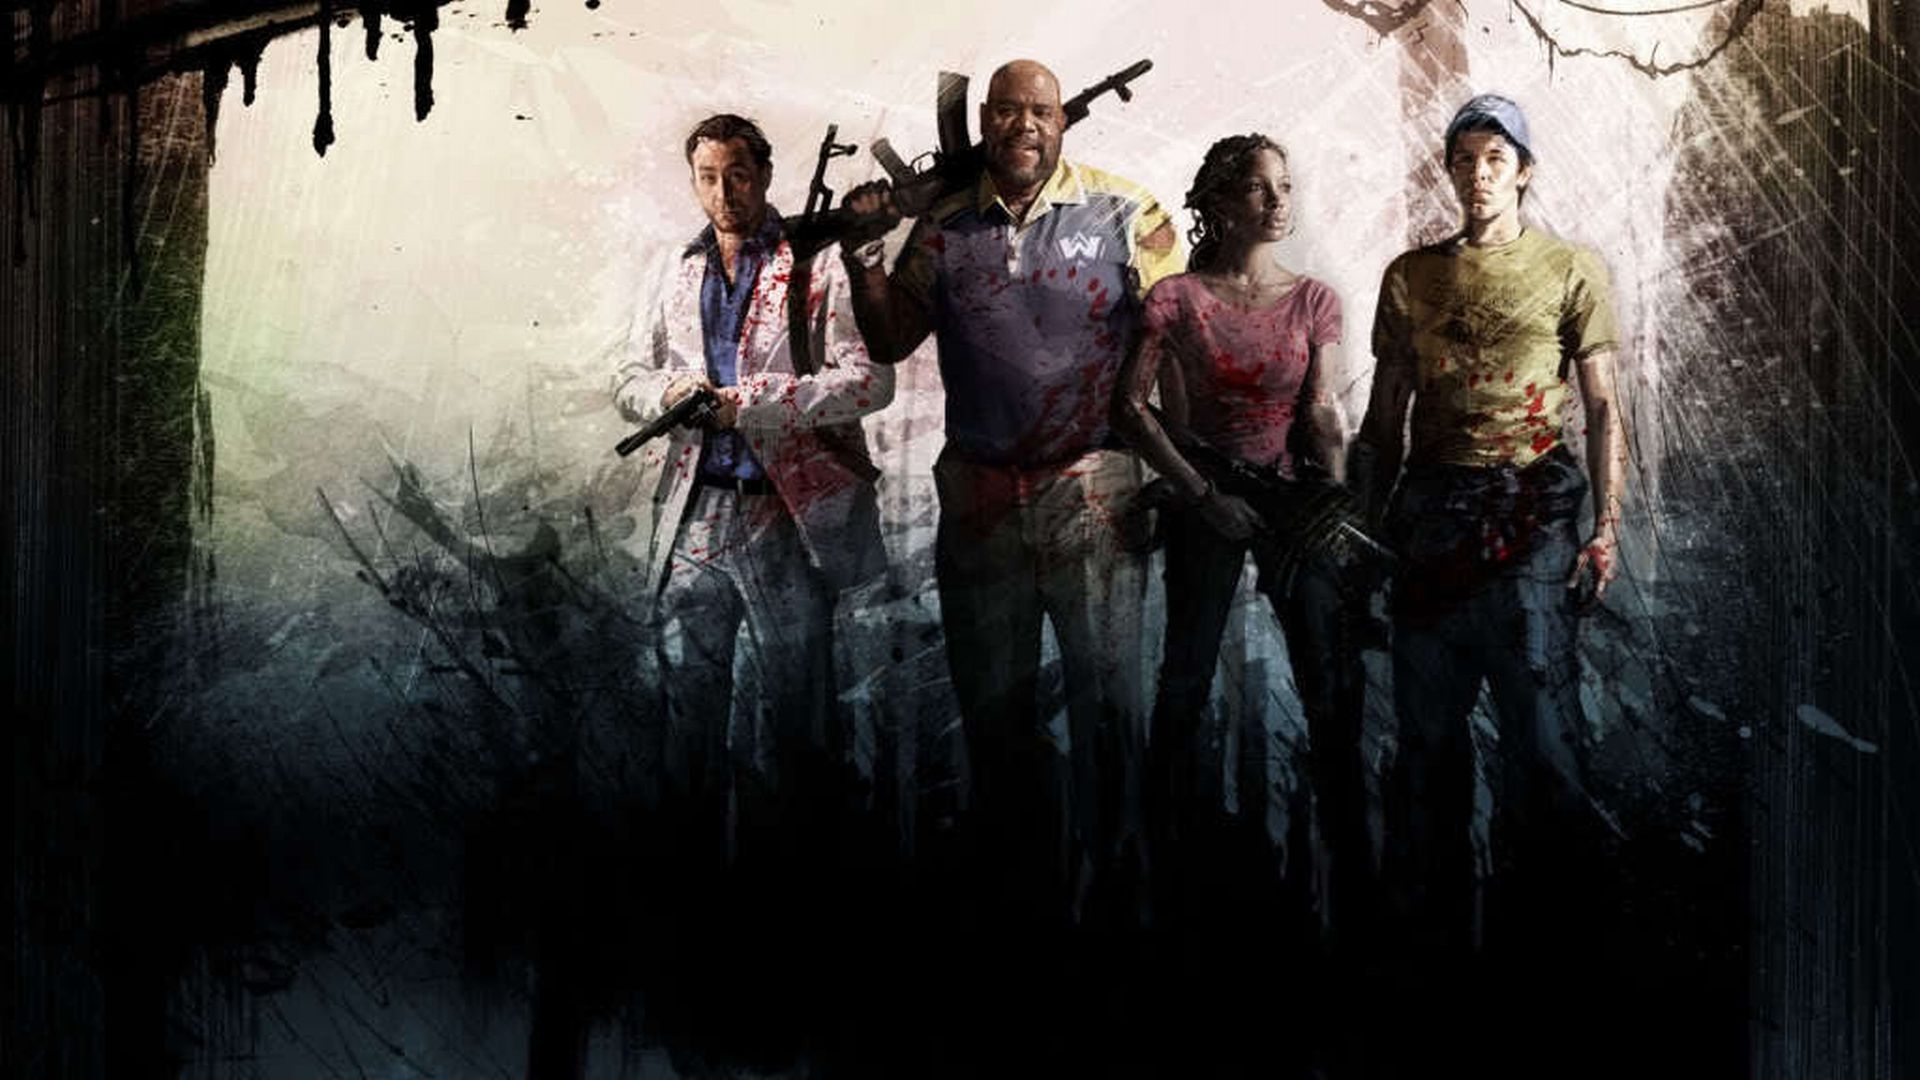 112 Left 4 Dead HD Wallpapers | Backgrounds - Wallpaper Abyss